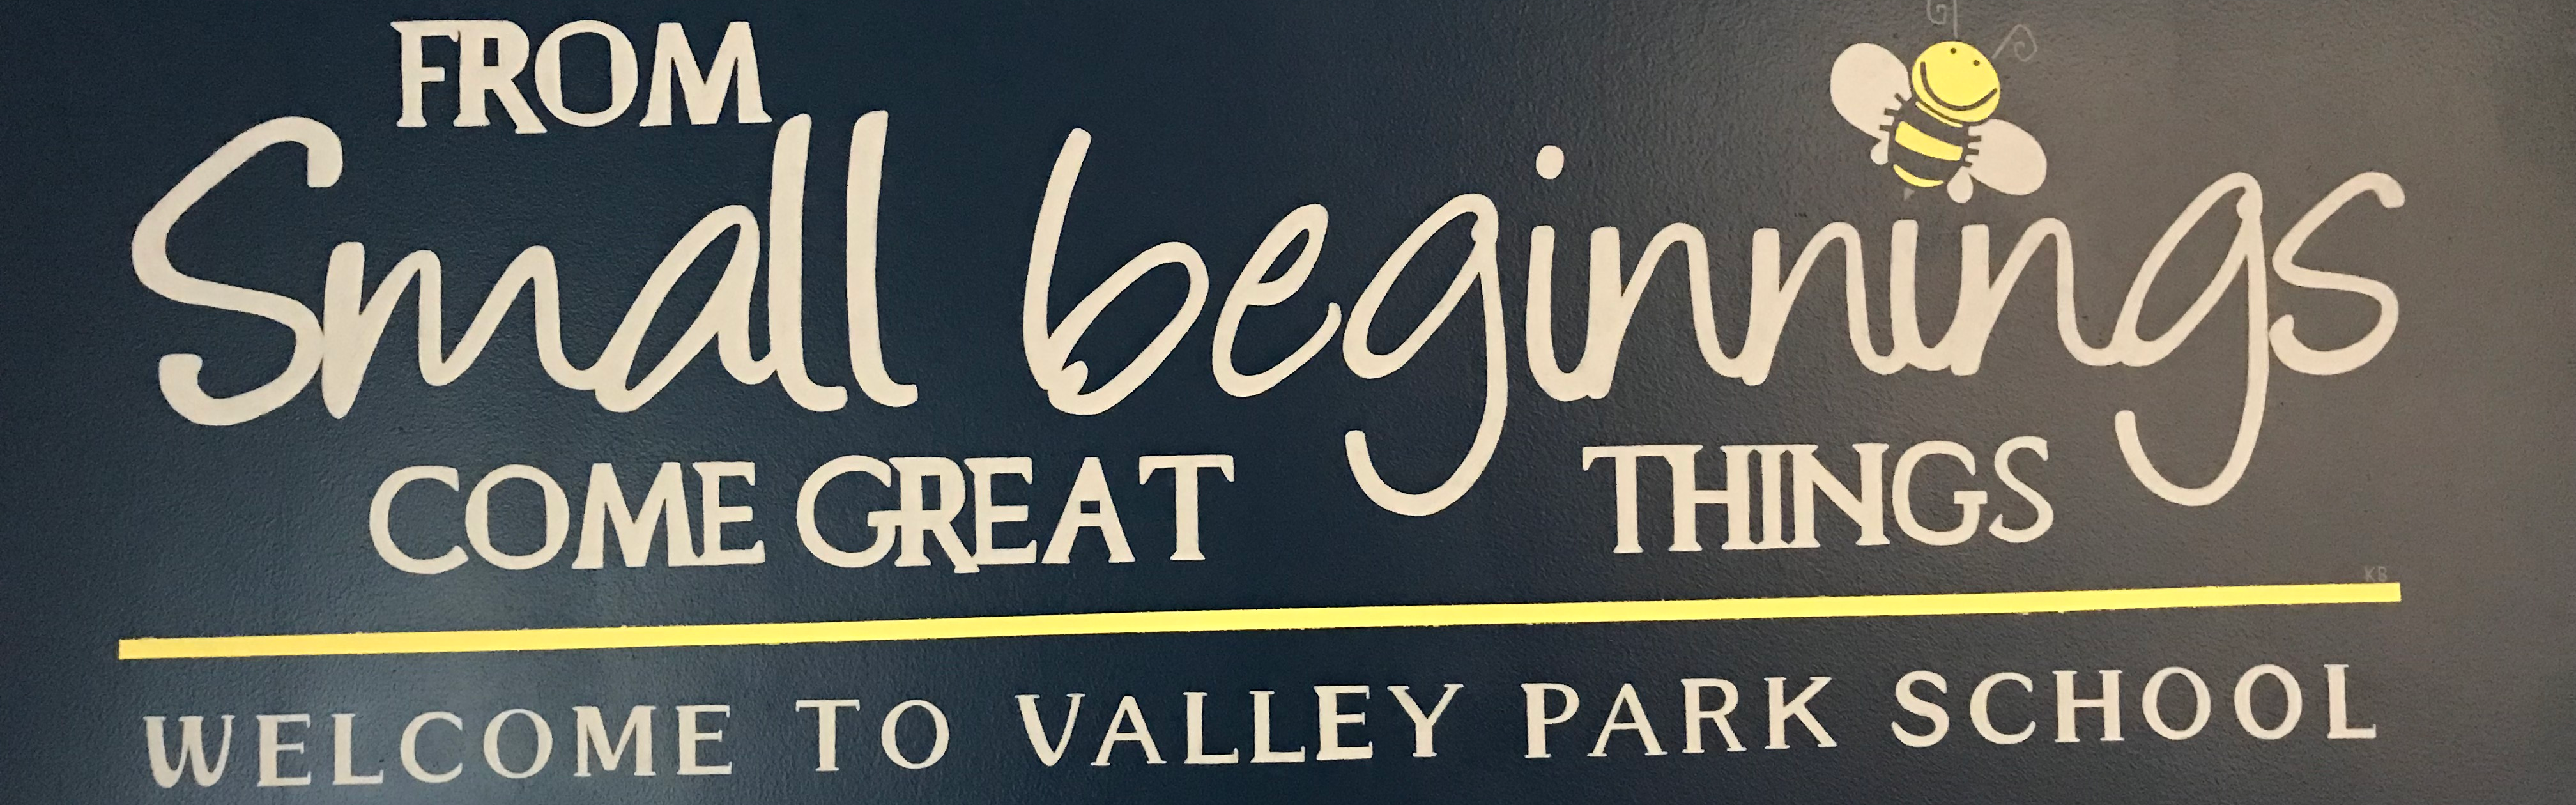 from small beginnings come great things welcome to valley park schools